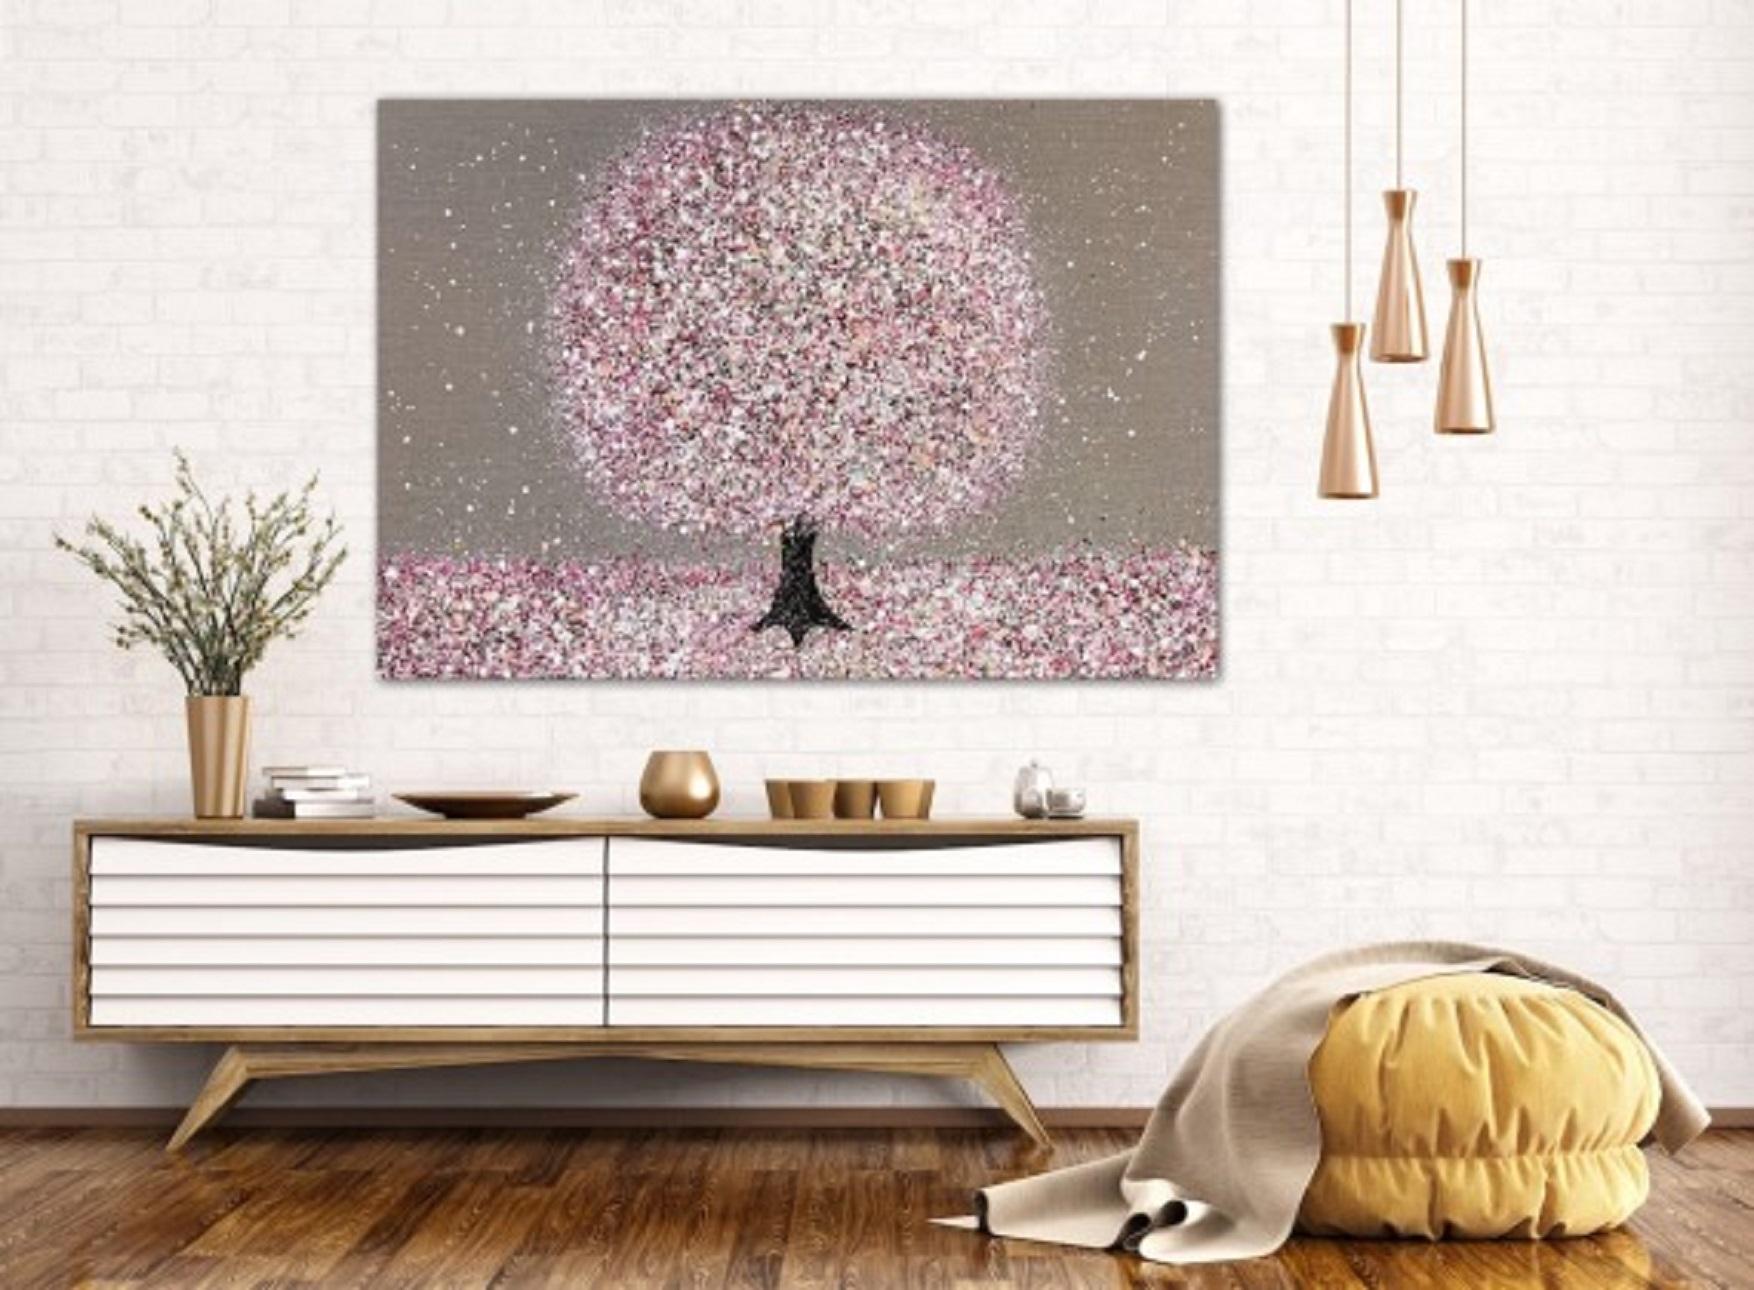 Spring Happiness by Nicky Chubb [2021]
original

Acrylic Paint on Canvas

Image size: H:81 cm x W:116 cm

Complete Size of Unframed Work: H:81 cm x W:116 cm x D:1.5cm

Frame Size: H:86 cm x W:121 cm x D:3.5cm

Sold Framed

Please note that insitu